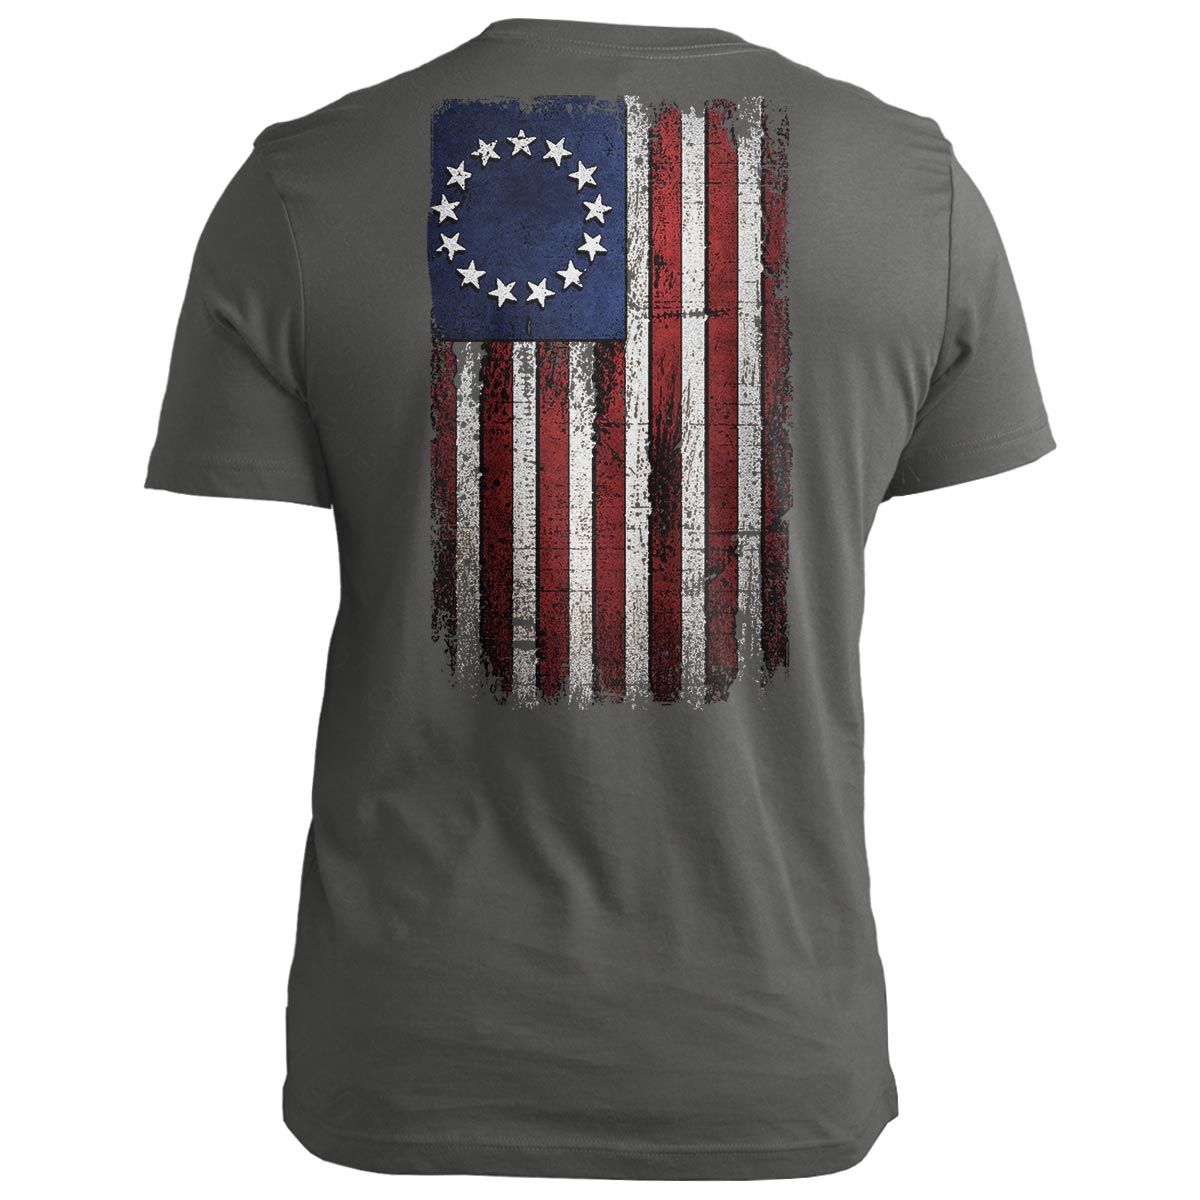 The Union and The Constitution Forever - 1 Nation Design